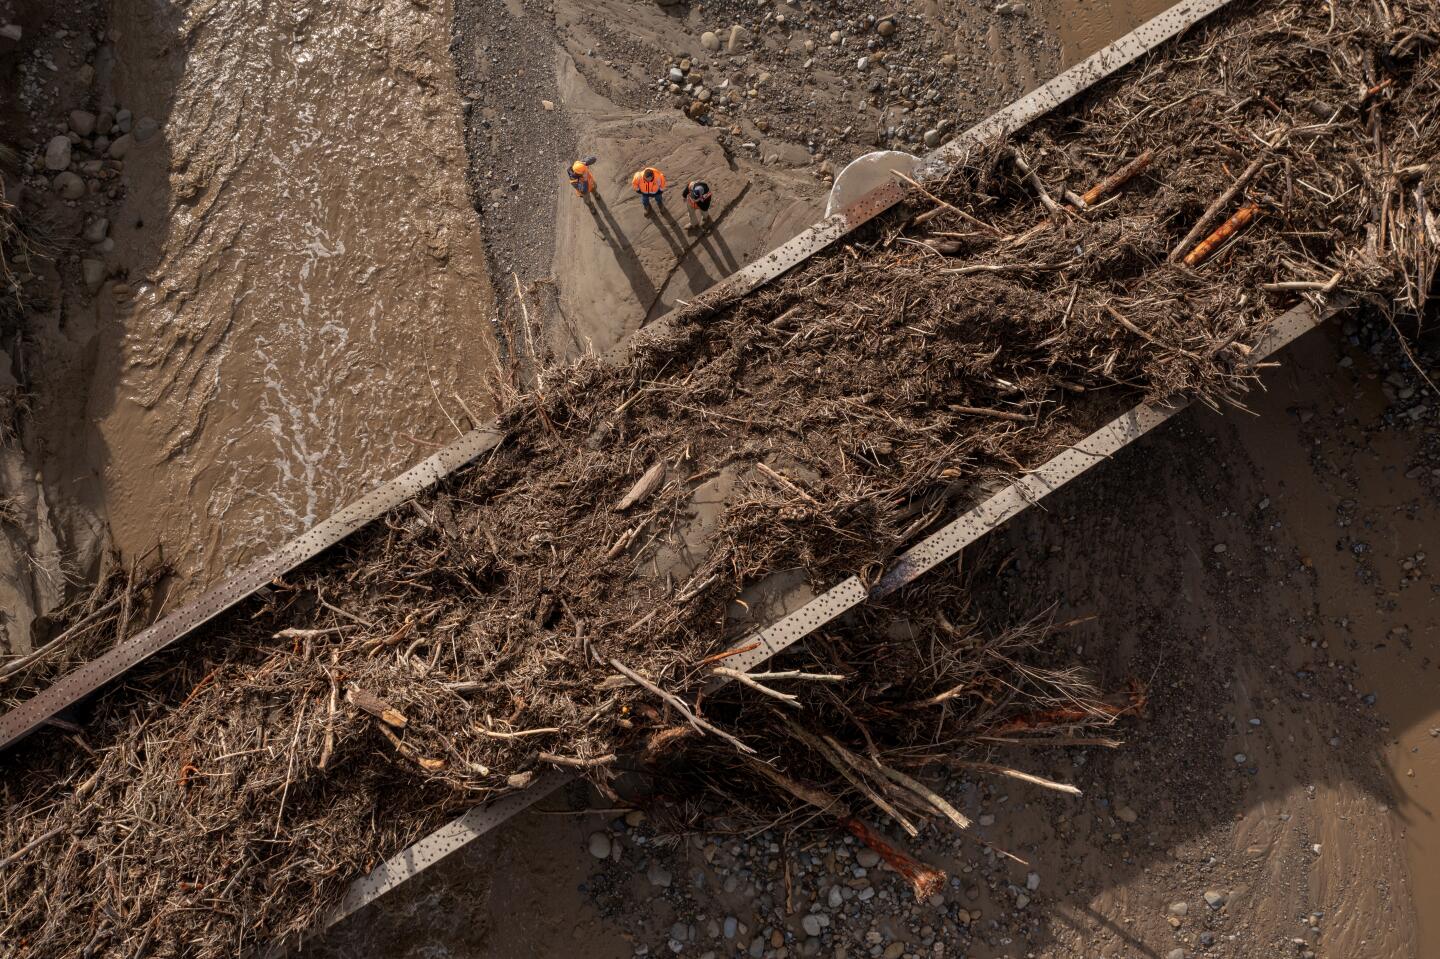 FILLMORE CA - JANUARY 11: In an aerial view, workers inspect a railway bridge over Hopper Creek that is covered in storm debris on January 11, 2023 near Fillmore, California. A series of powerful storms continue to pound California in striking contrast to the past three years of severe to extreme drought experienced by most of the state. The storms are damaging yet bringing heavy rainfall totals which, though not expected to end the drought, is helping to refill reservoirs that have shrunken to historic low levels because of drought. (Photo by David McNew/Getty Images)